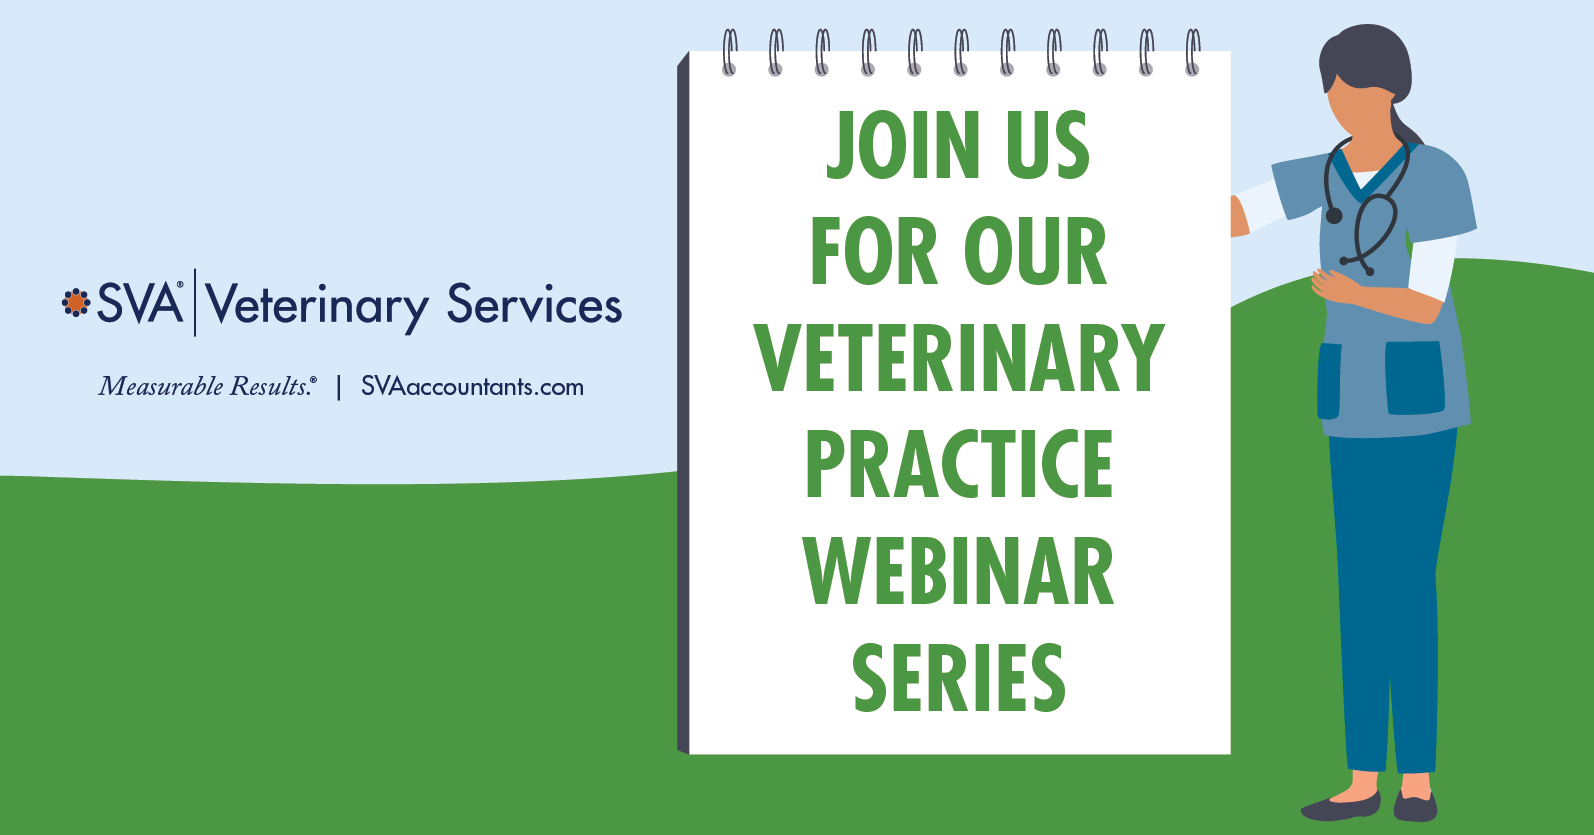 Vet Webinar Buy/Sell Series Part III: Developing Your Strategy